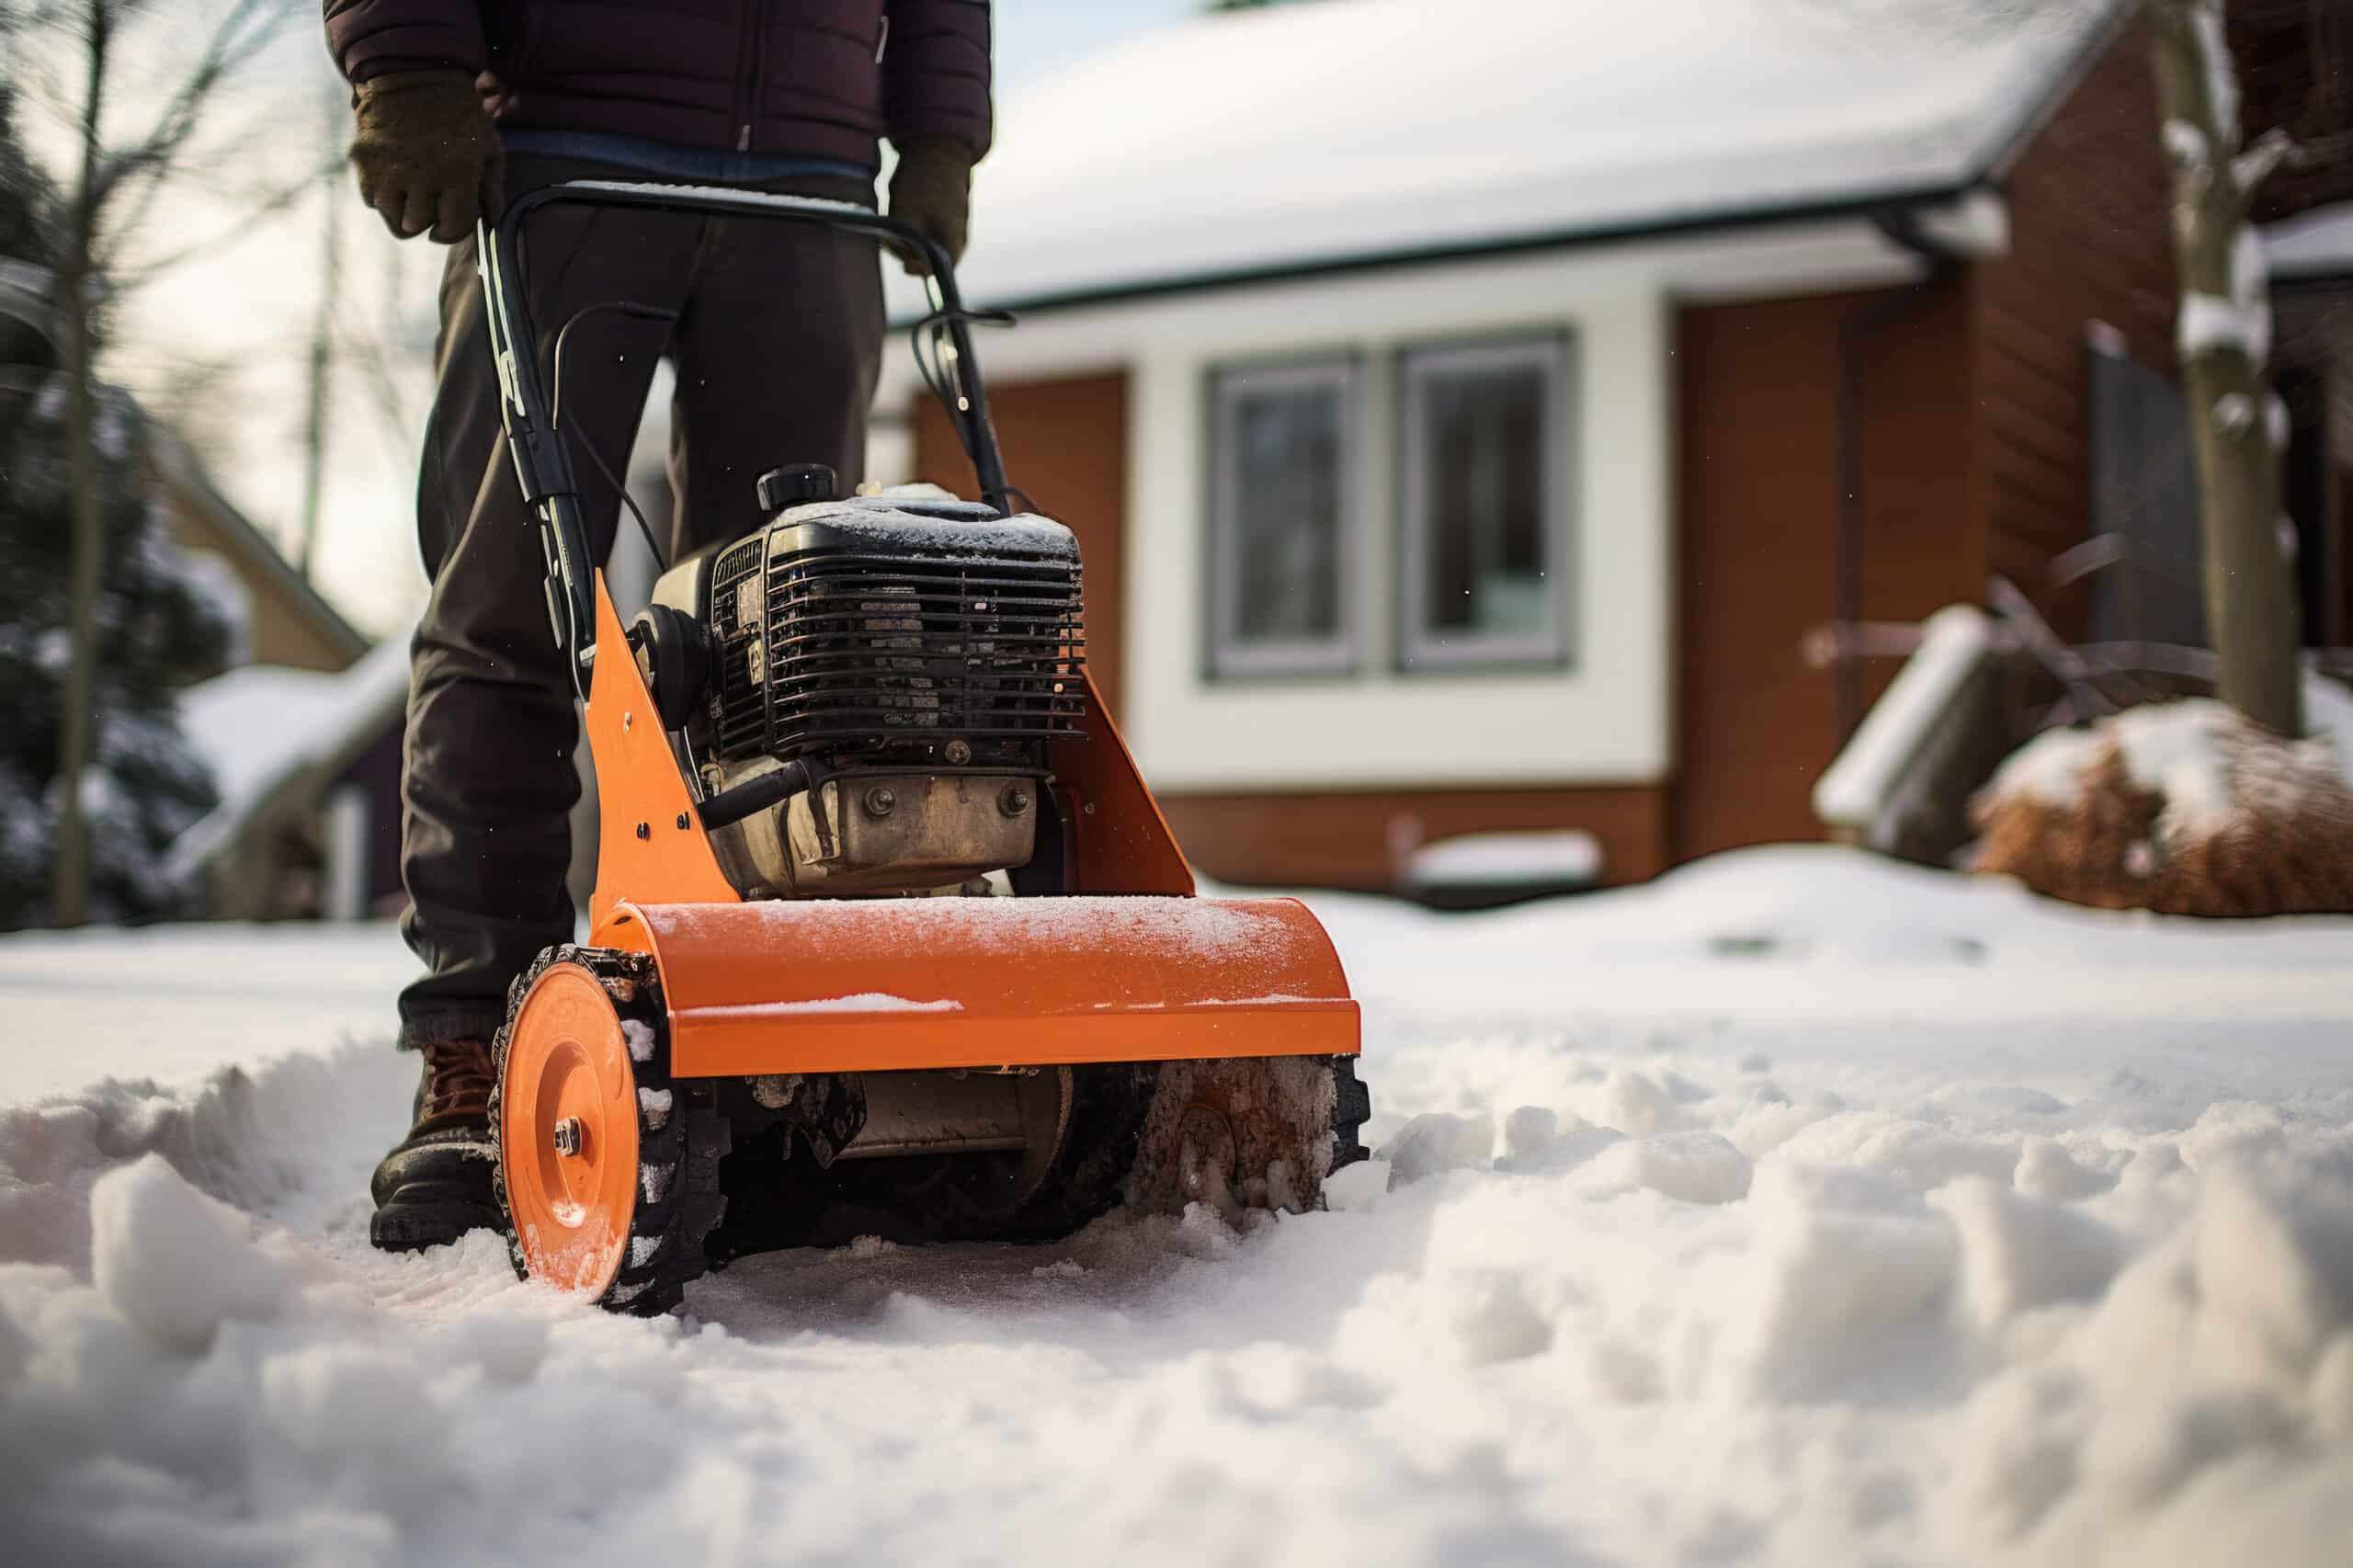 www.appr.com : Does Harbor Freight carry snow blowers?